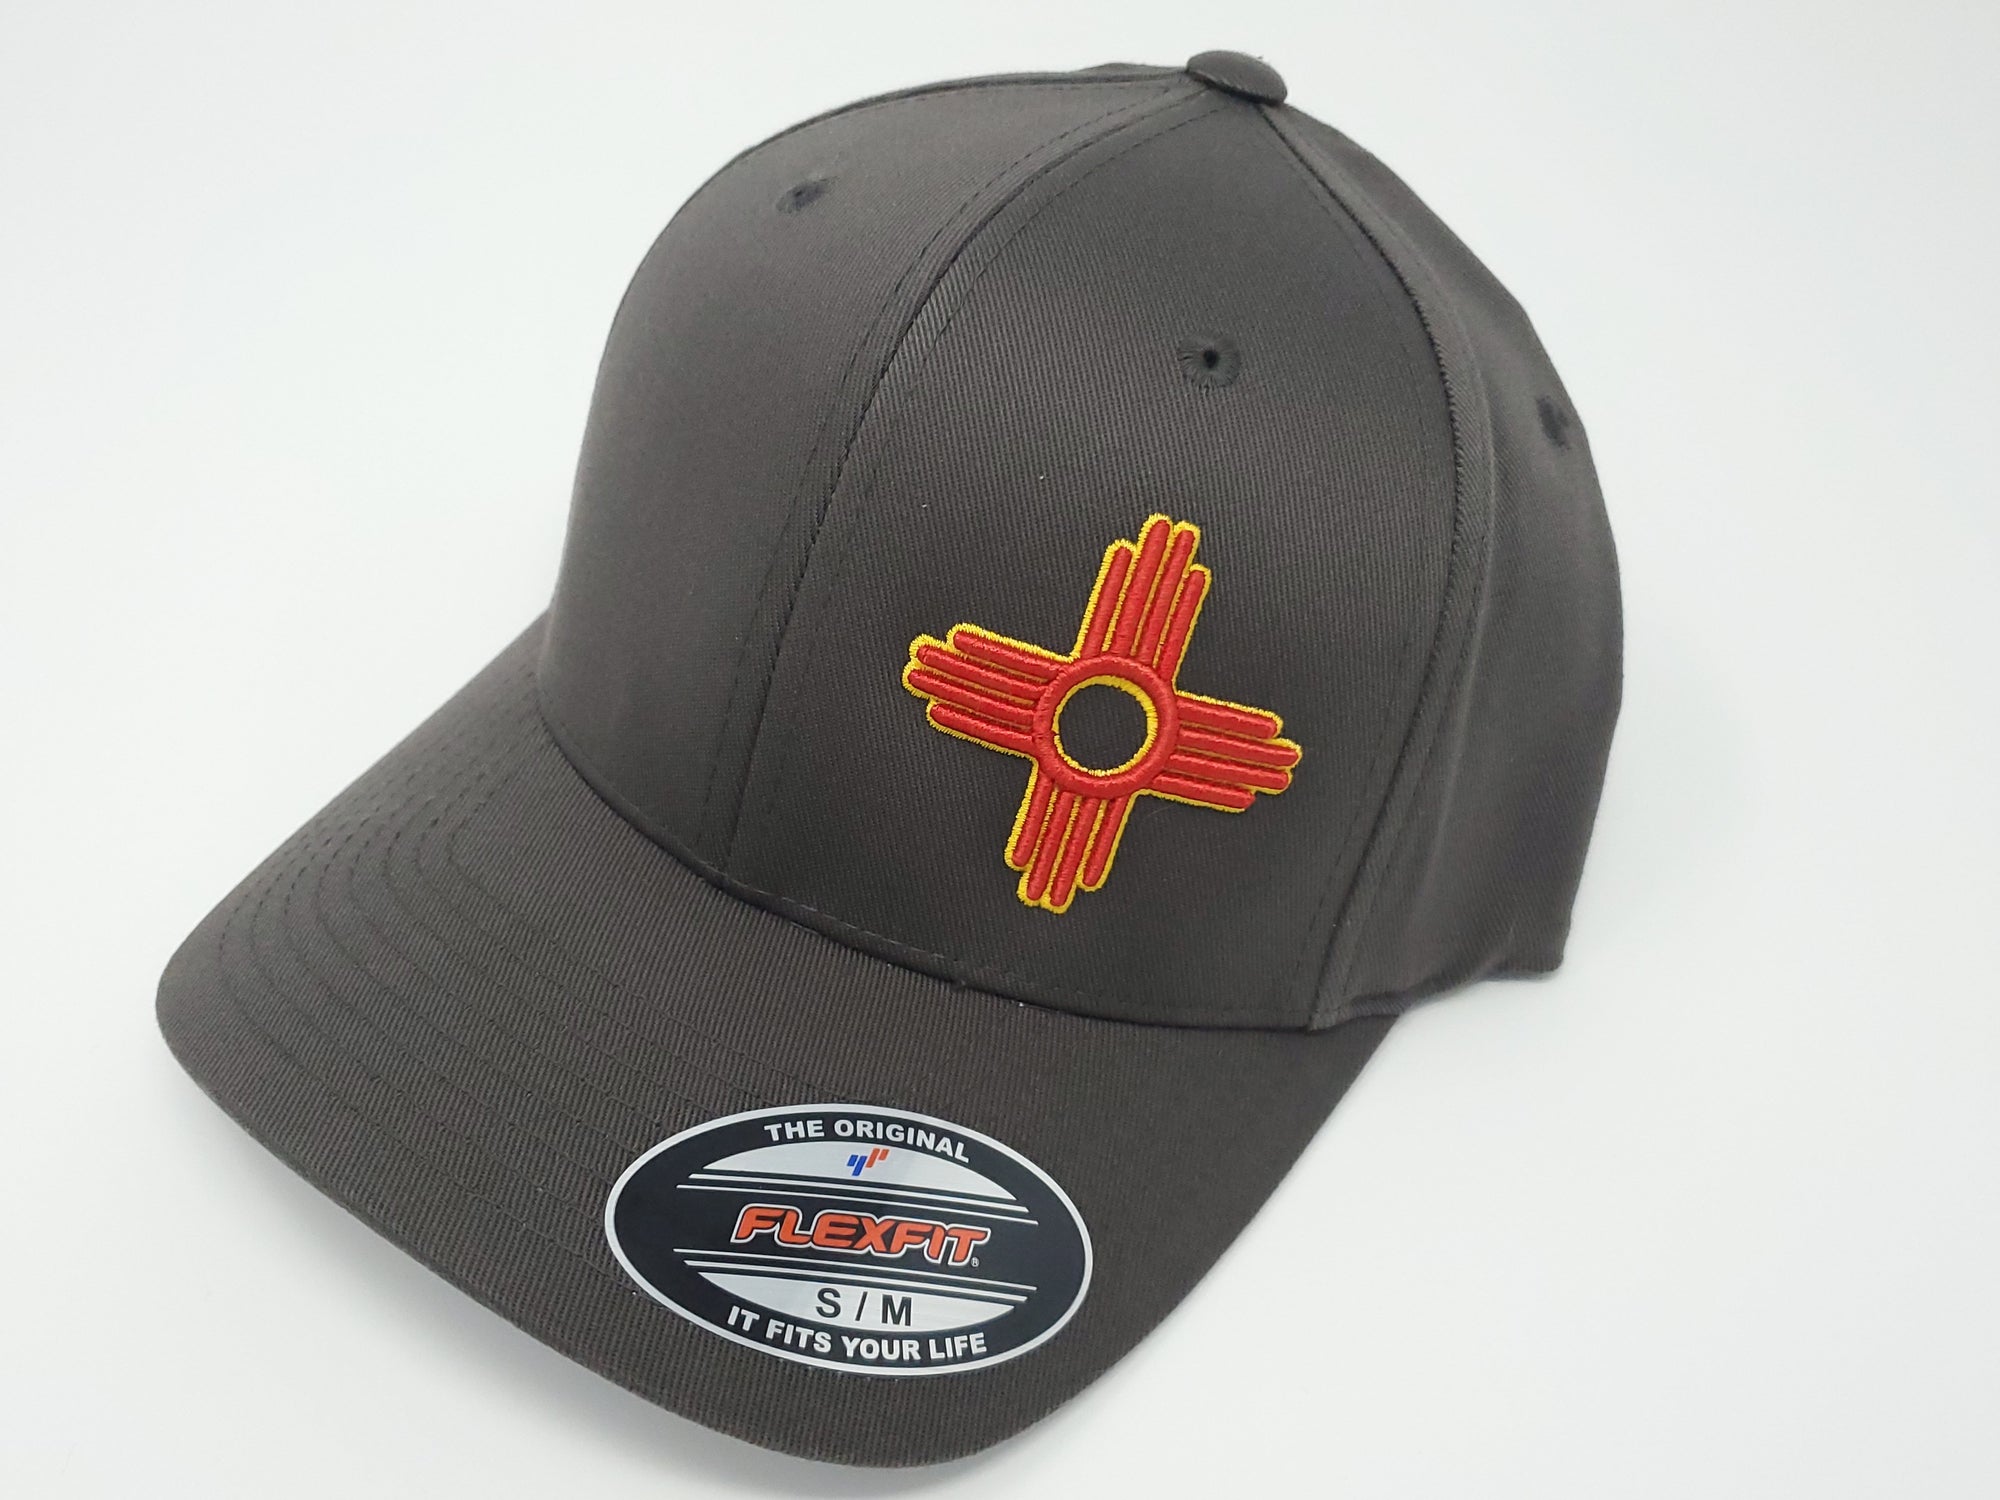 Zia Embroidered Fitted FlexFit Hat - Ragged Apparel Screen Printing and Signs - www.nmshirts.com